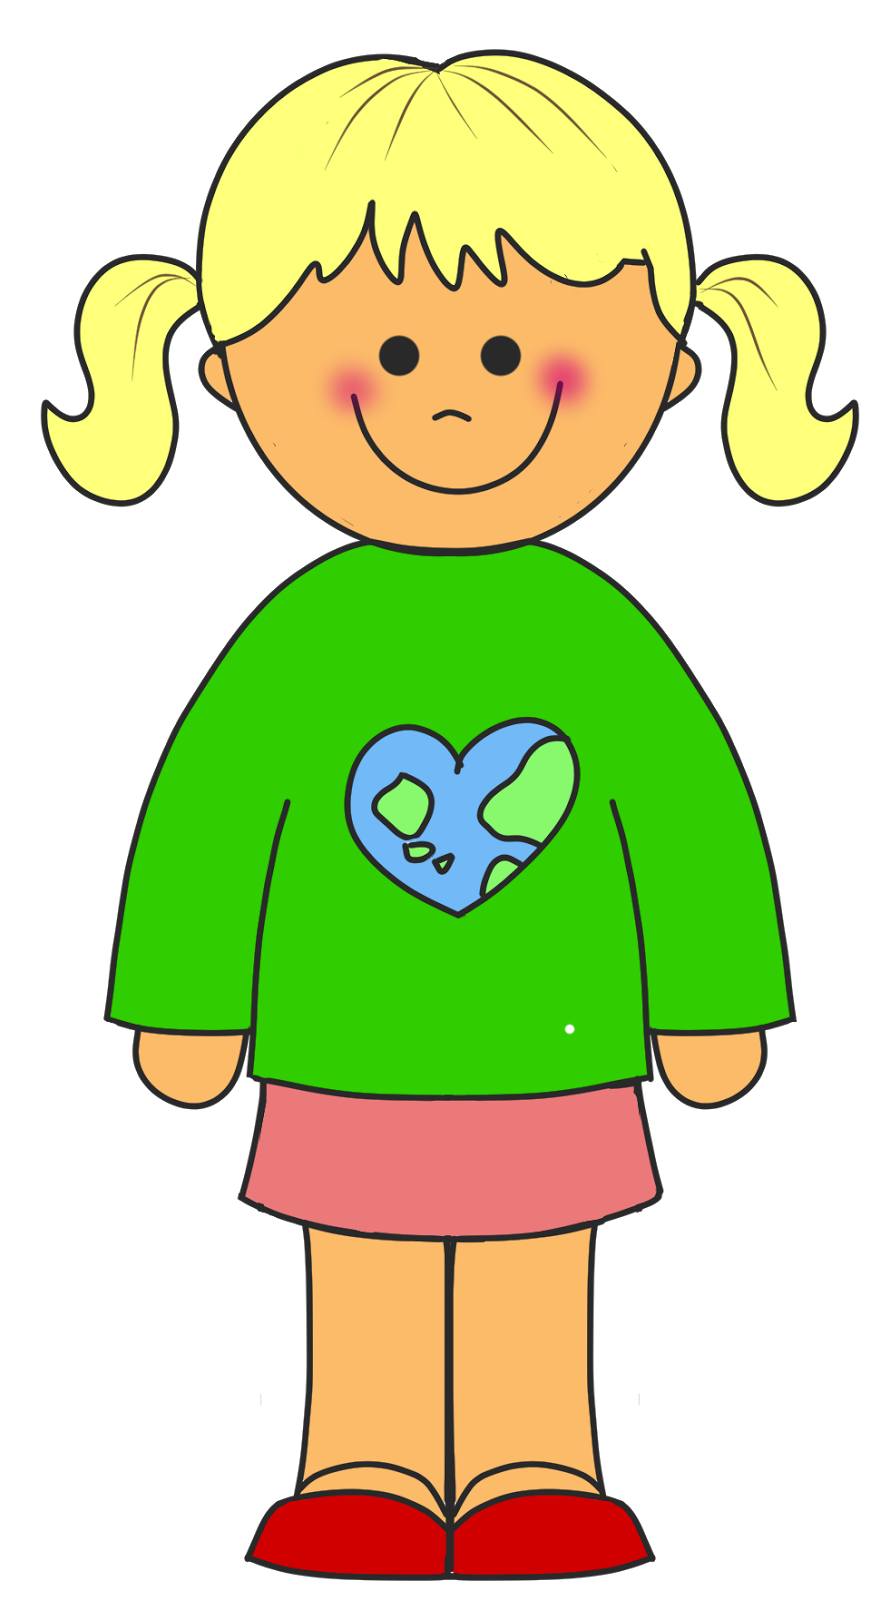 Girl Clipart | Clipart Panda - Free Clipart Images